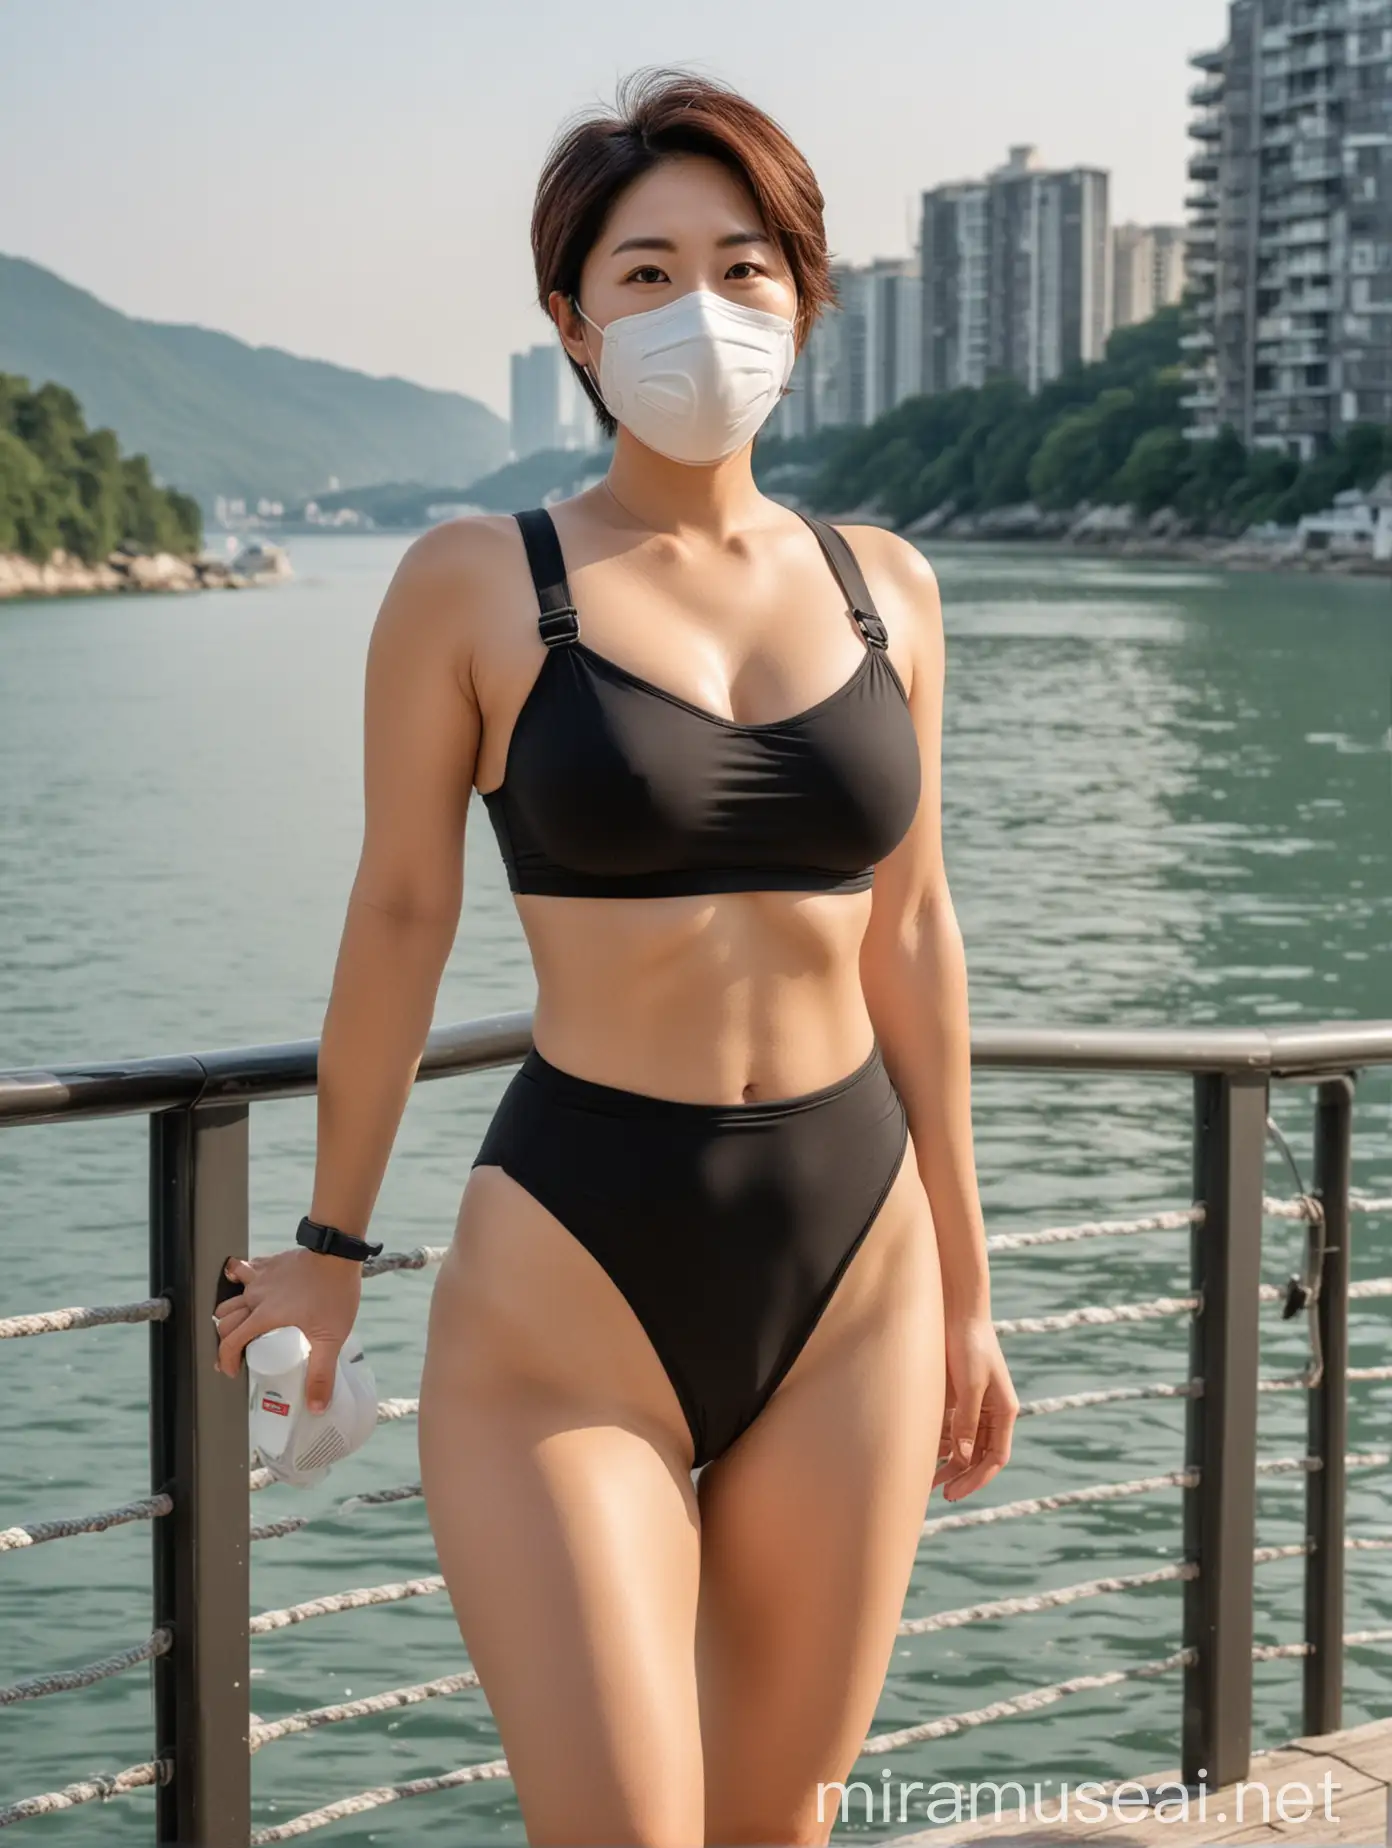 an attractive, bodacious, buxom, full-chested korean woman in her late 30s, with short hair, in a respirator mask, standing with legs spread, on a lakeside deck on a sunny day, in a sporty black  french-cut high rise bikini with white trim